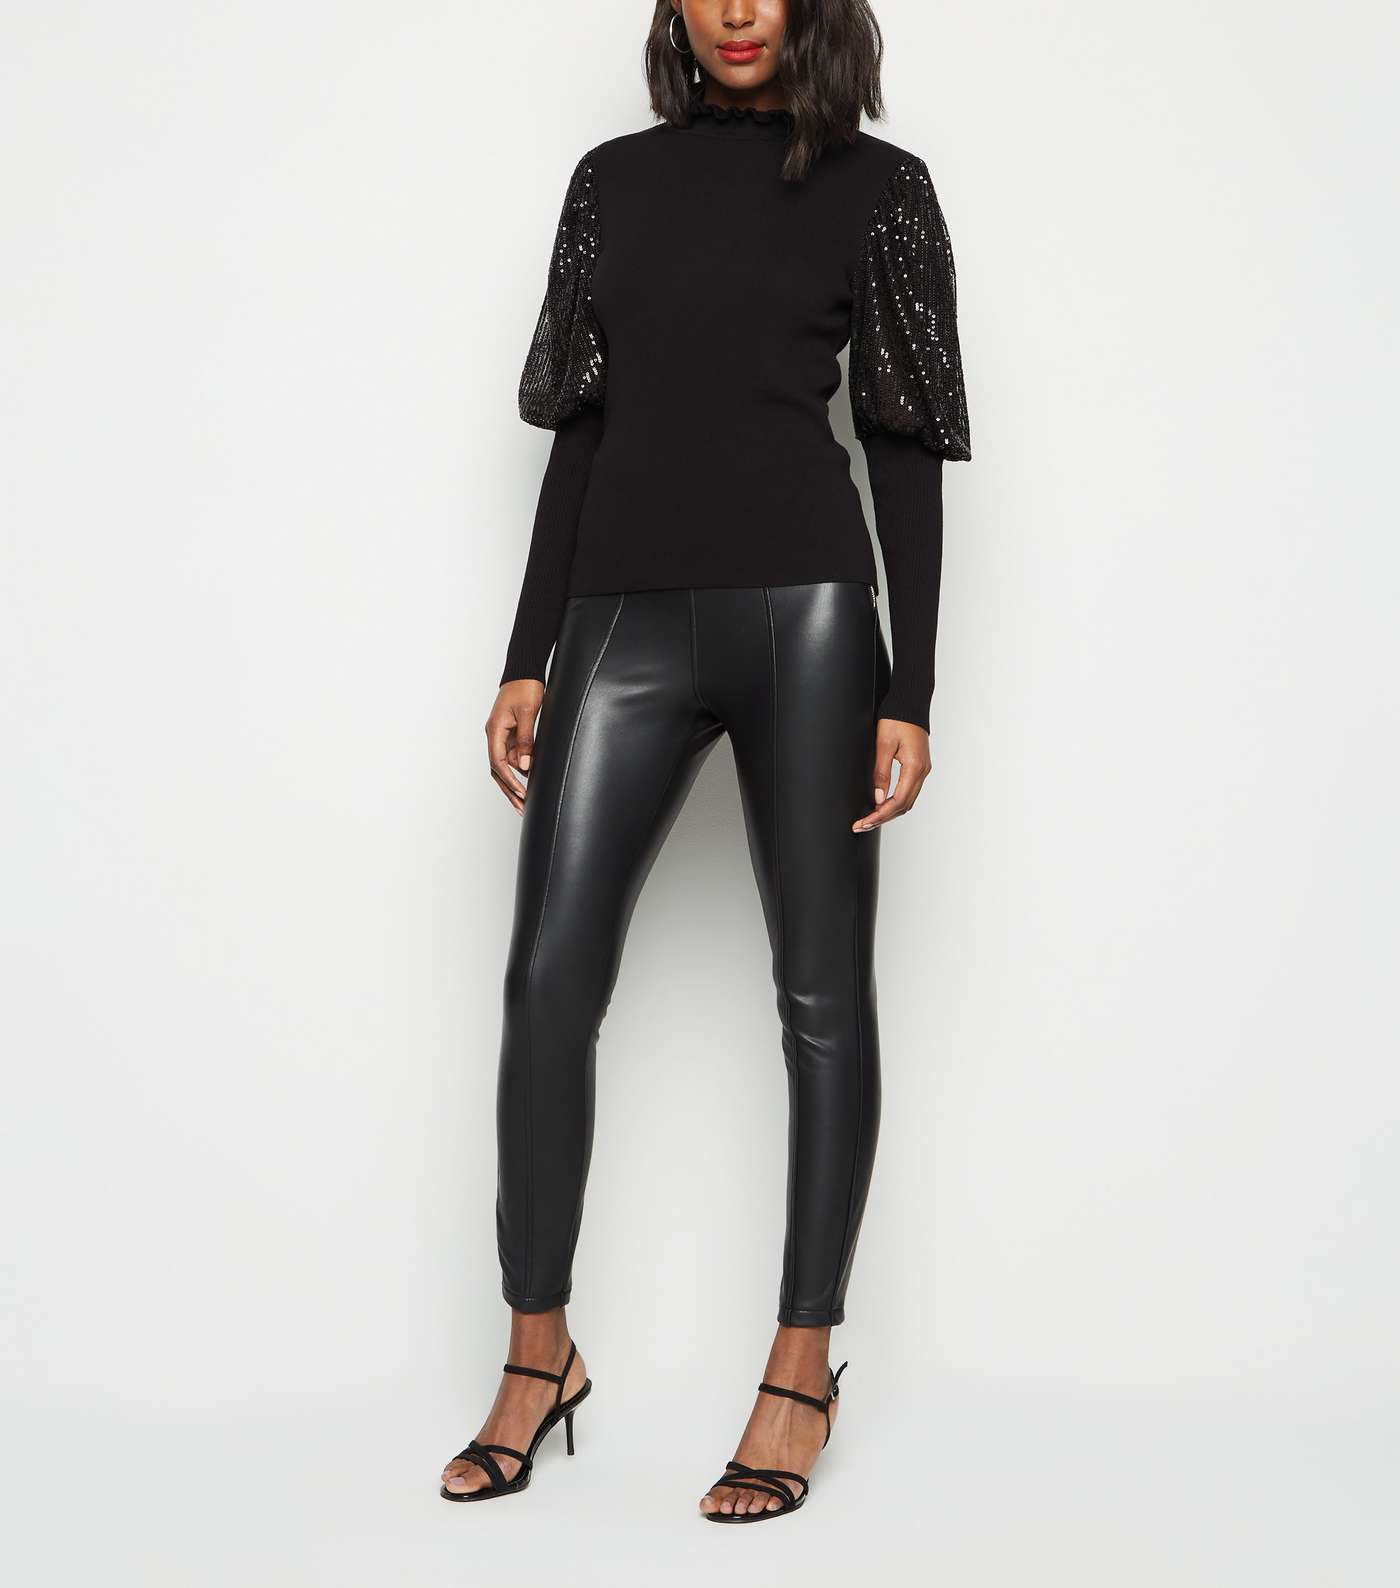 Cameo Rose Black Sequin Puff Sleeve Jumper Image 2